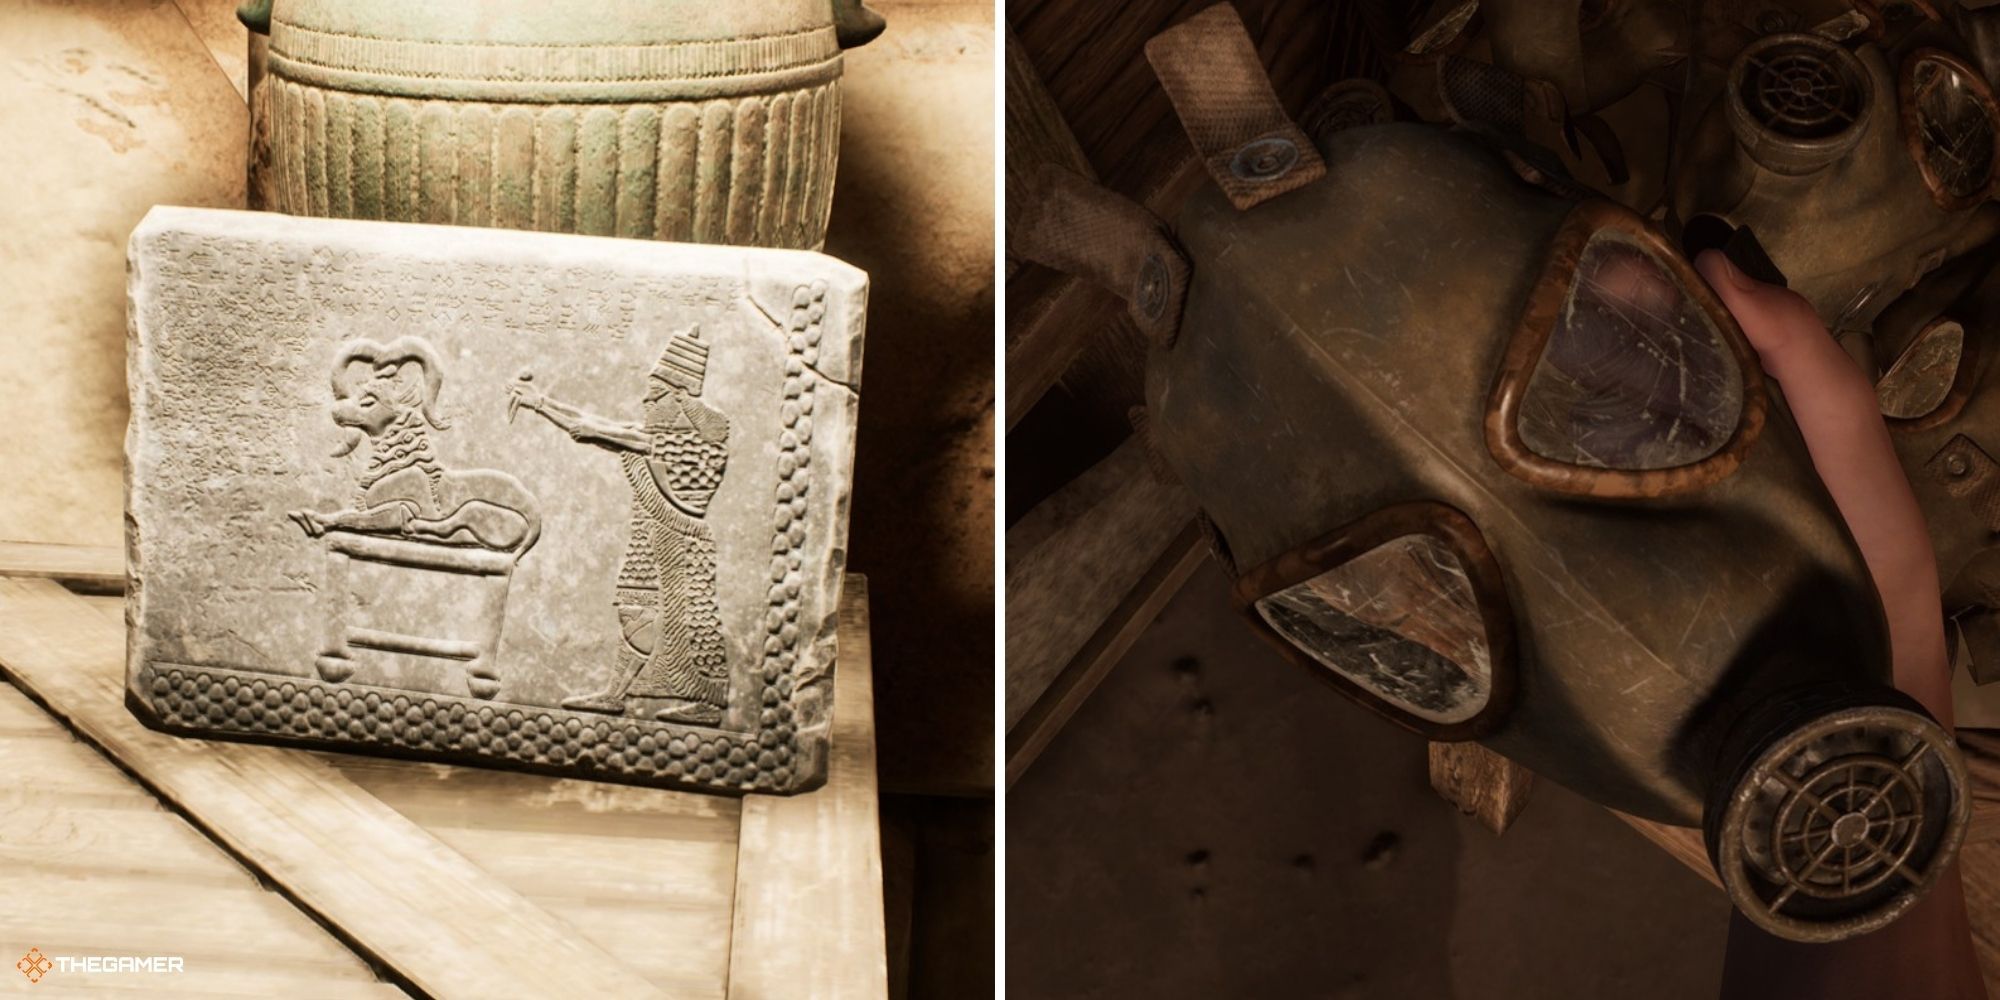 House of Ashes - The Raid - Staked Picture on left, Gas Masks on right